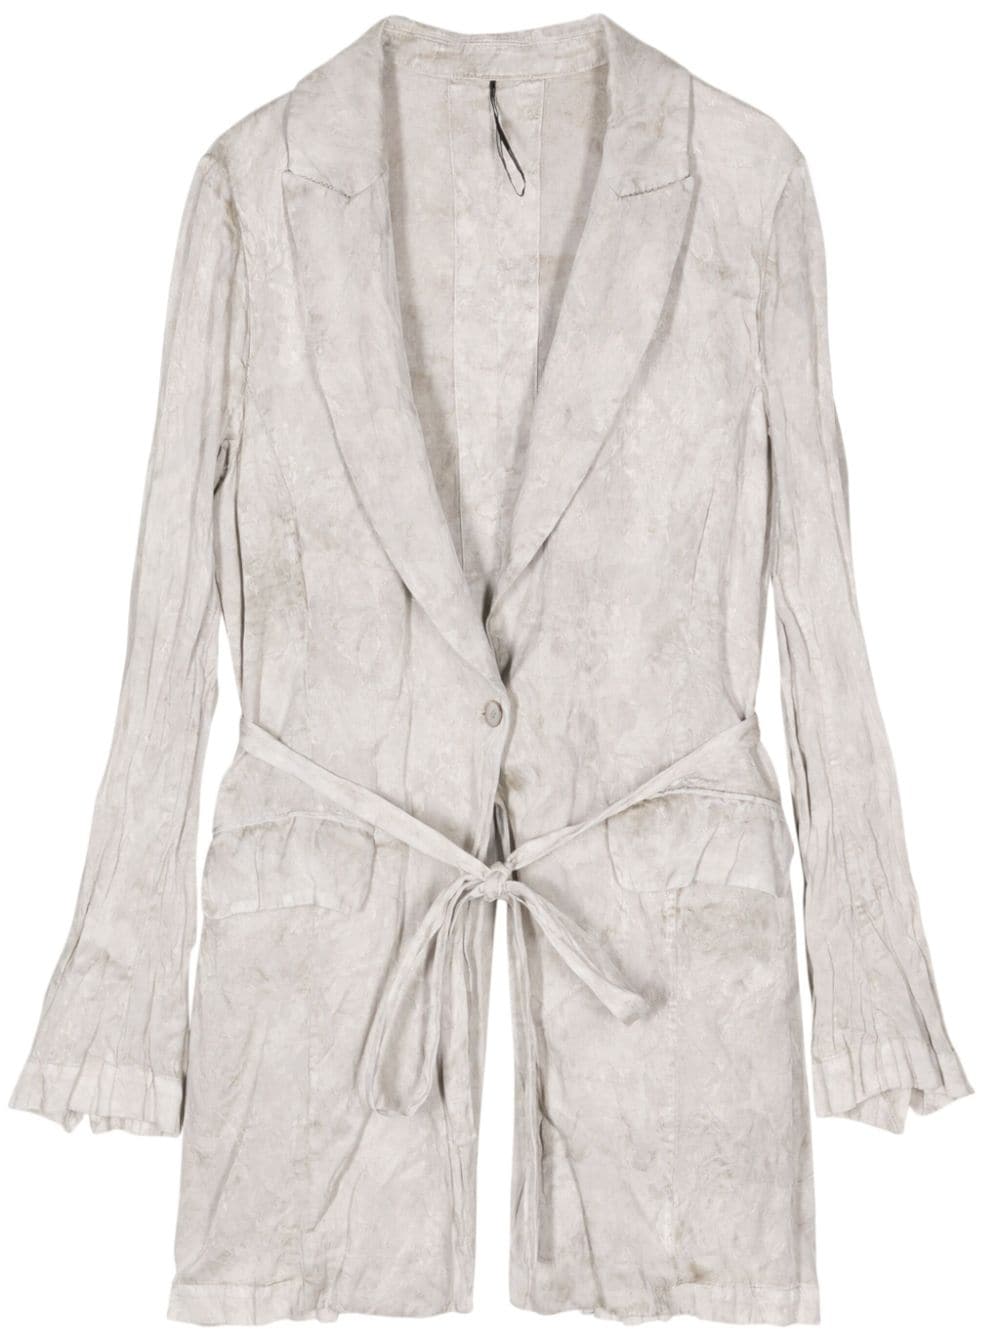 Masnada Belted Distressed Coat In Gray